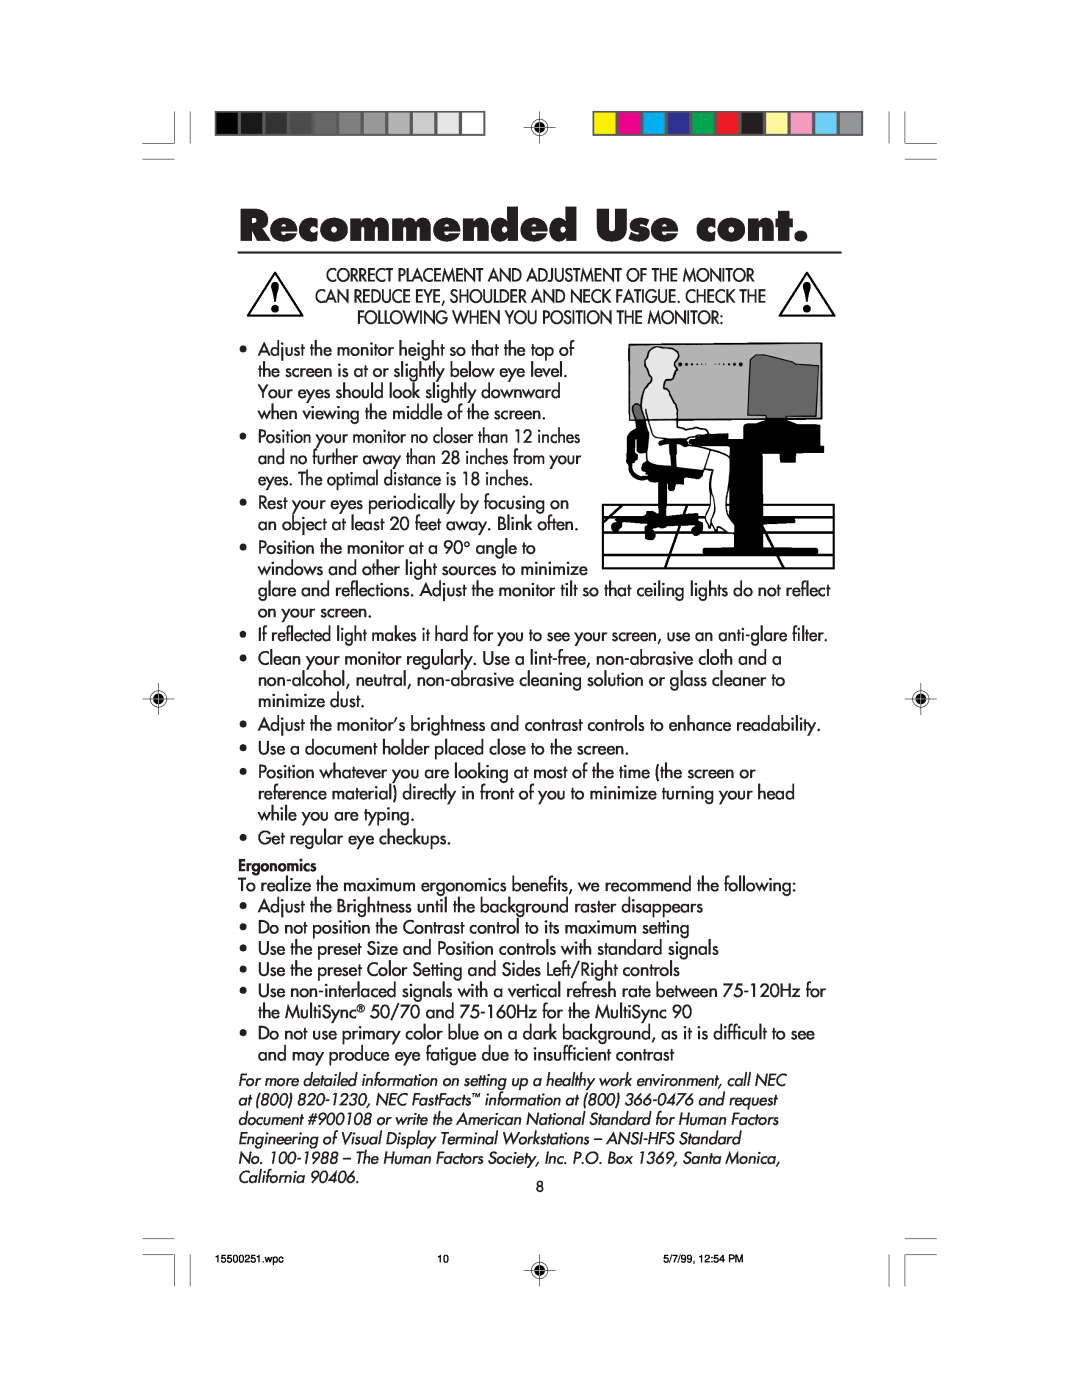 NEC 90, MultiSync 50 user manual Recommended Use cont 